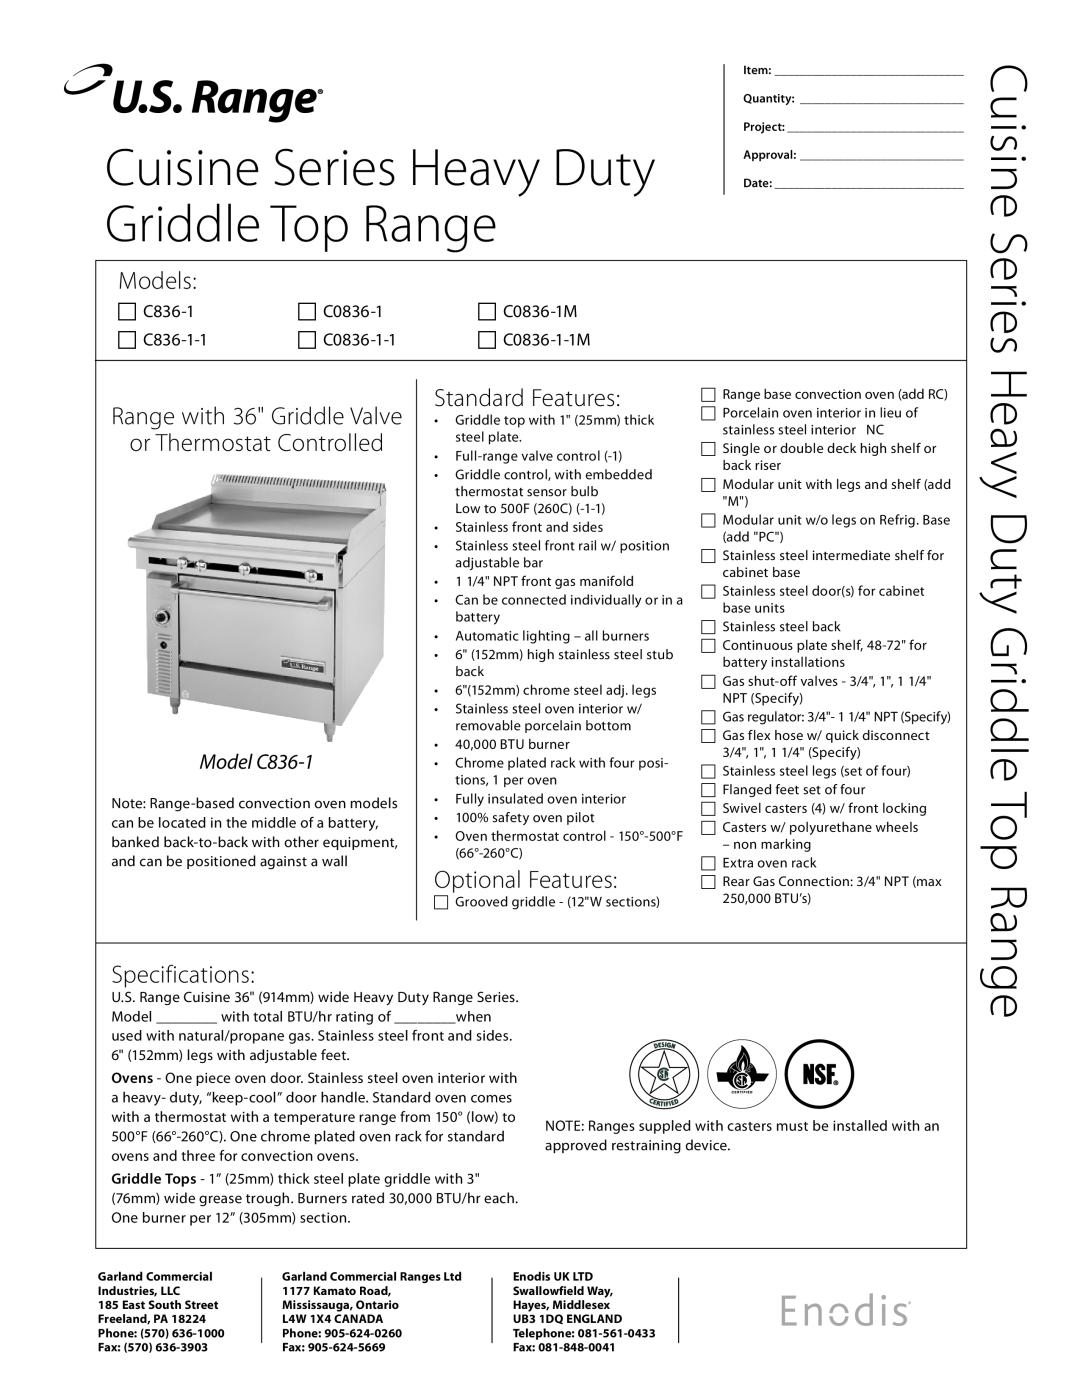 Garland C0836-1 specifications Cuisine Series Heavy Duty, Heavy Duty Griddle Top Range, Models, Specifications 